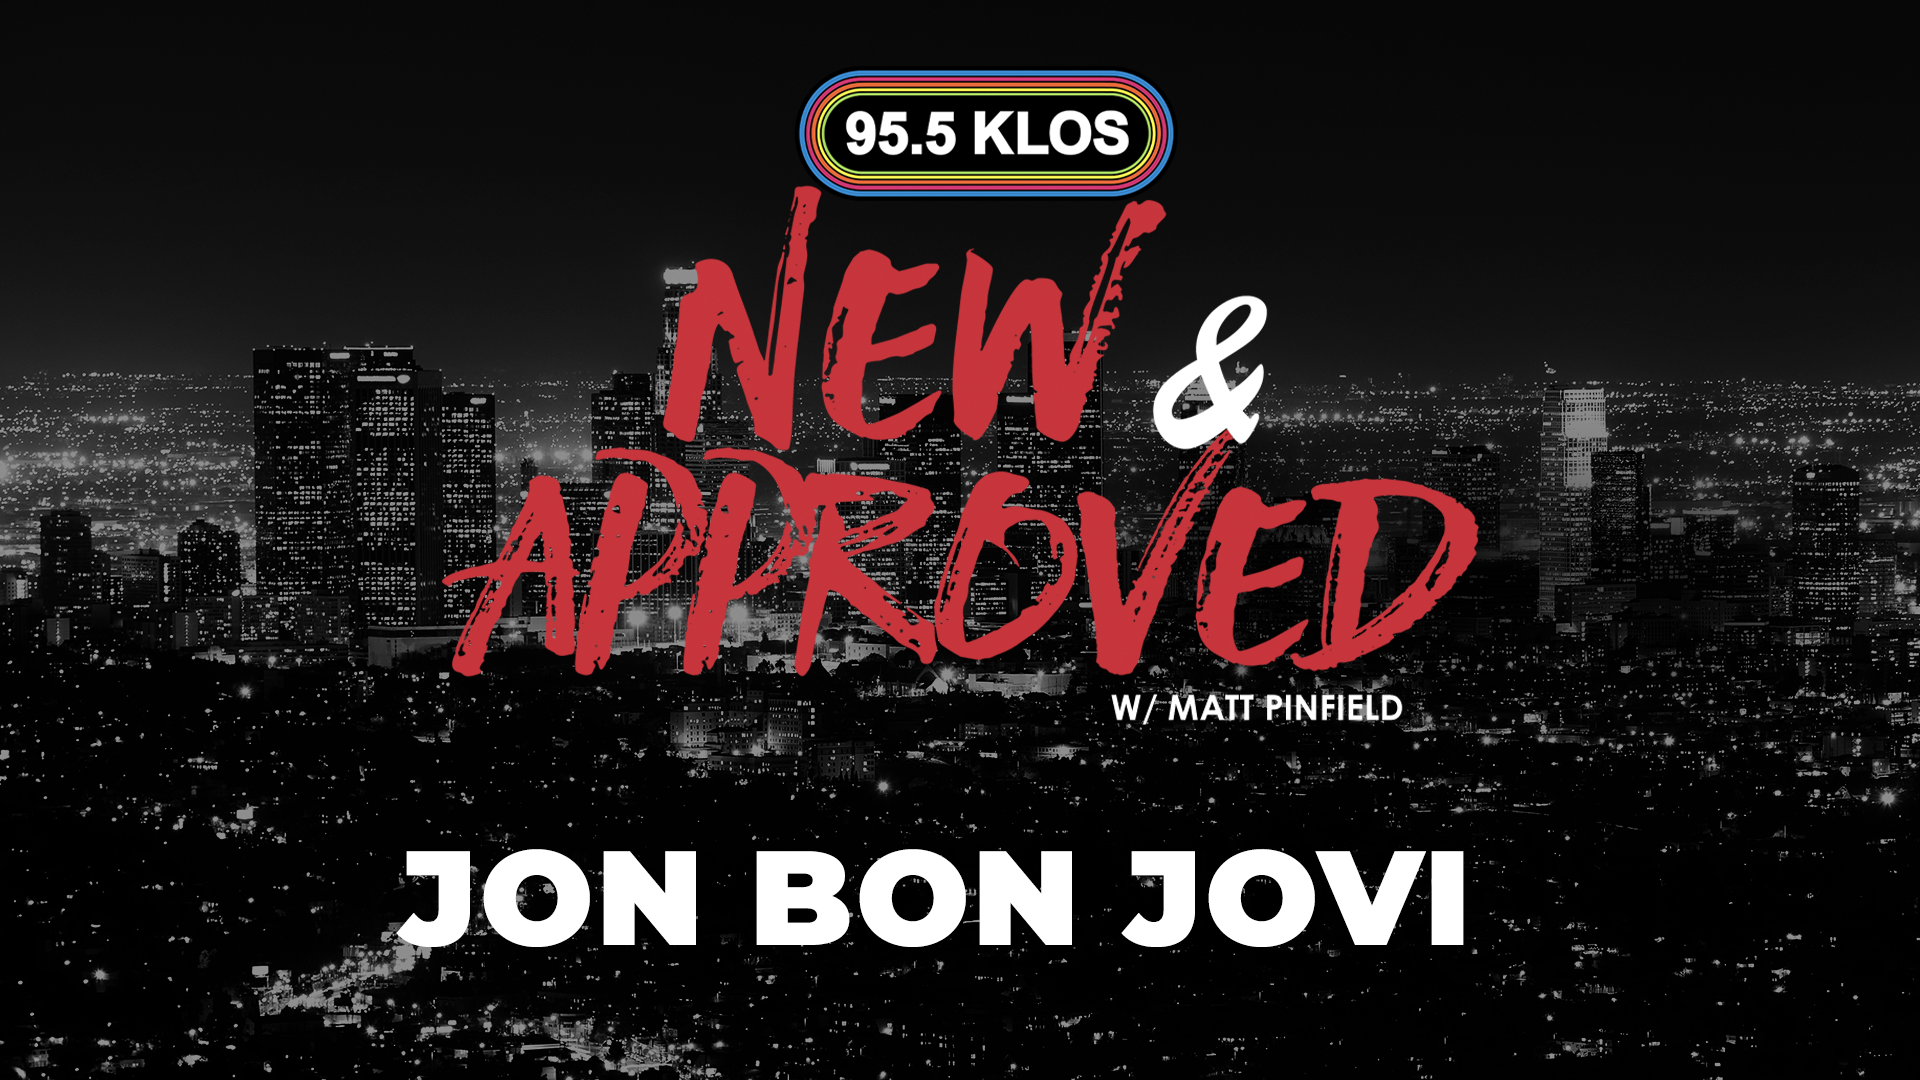 Jon Bon Jovi Discusses Bon Jovi’s Upcoming Record and More with Matt Pinfield on New & Approved